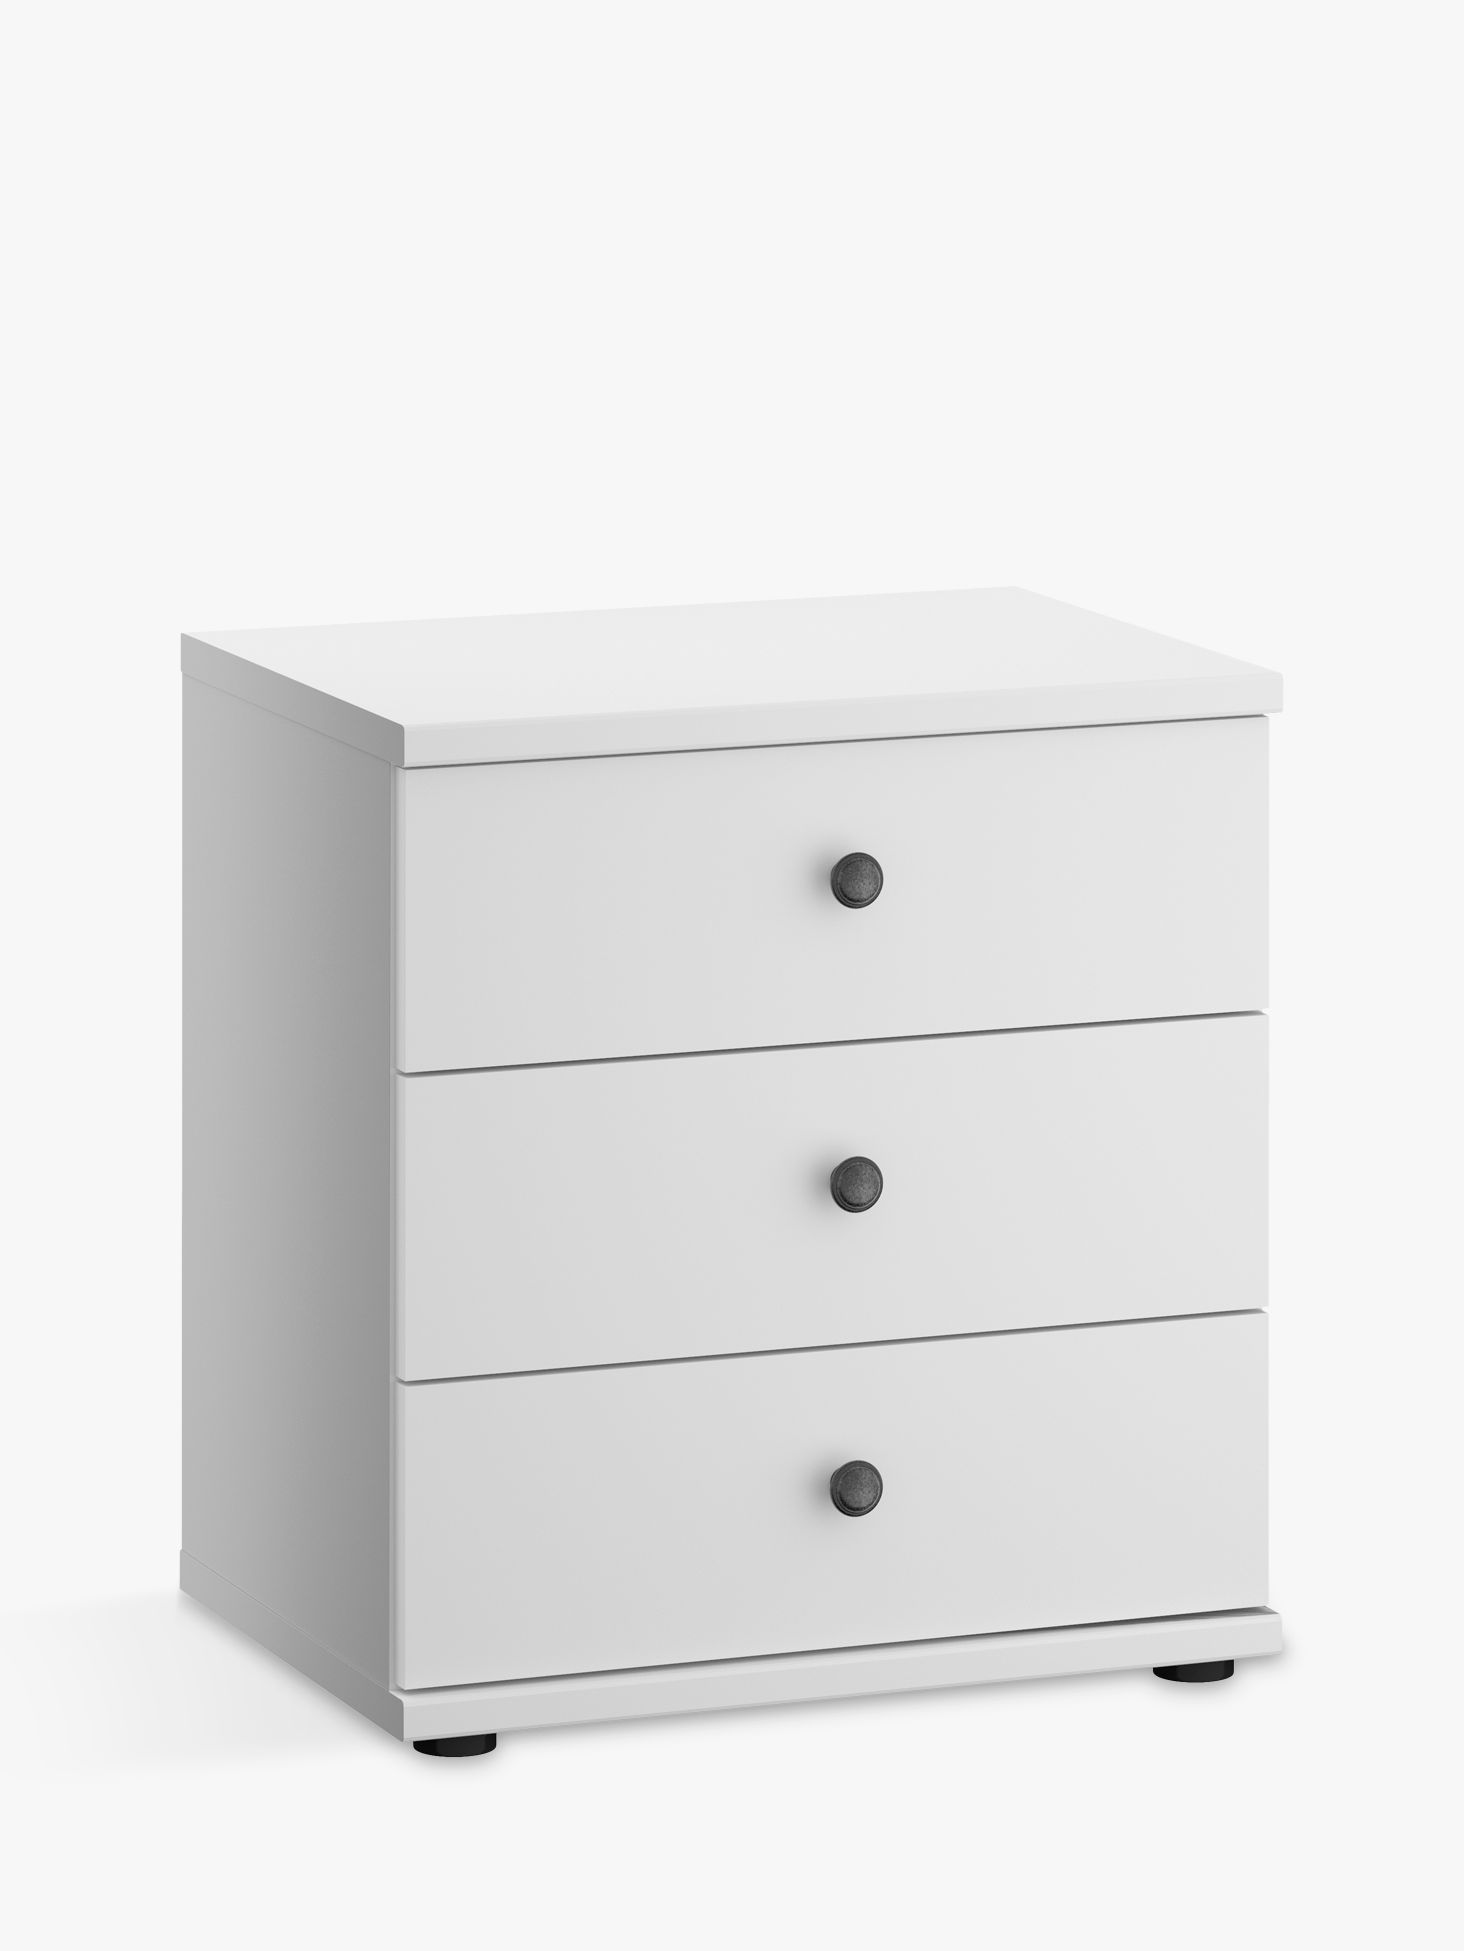 Photo of John lewis marlow 3 drawer bedside table 50cm